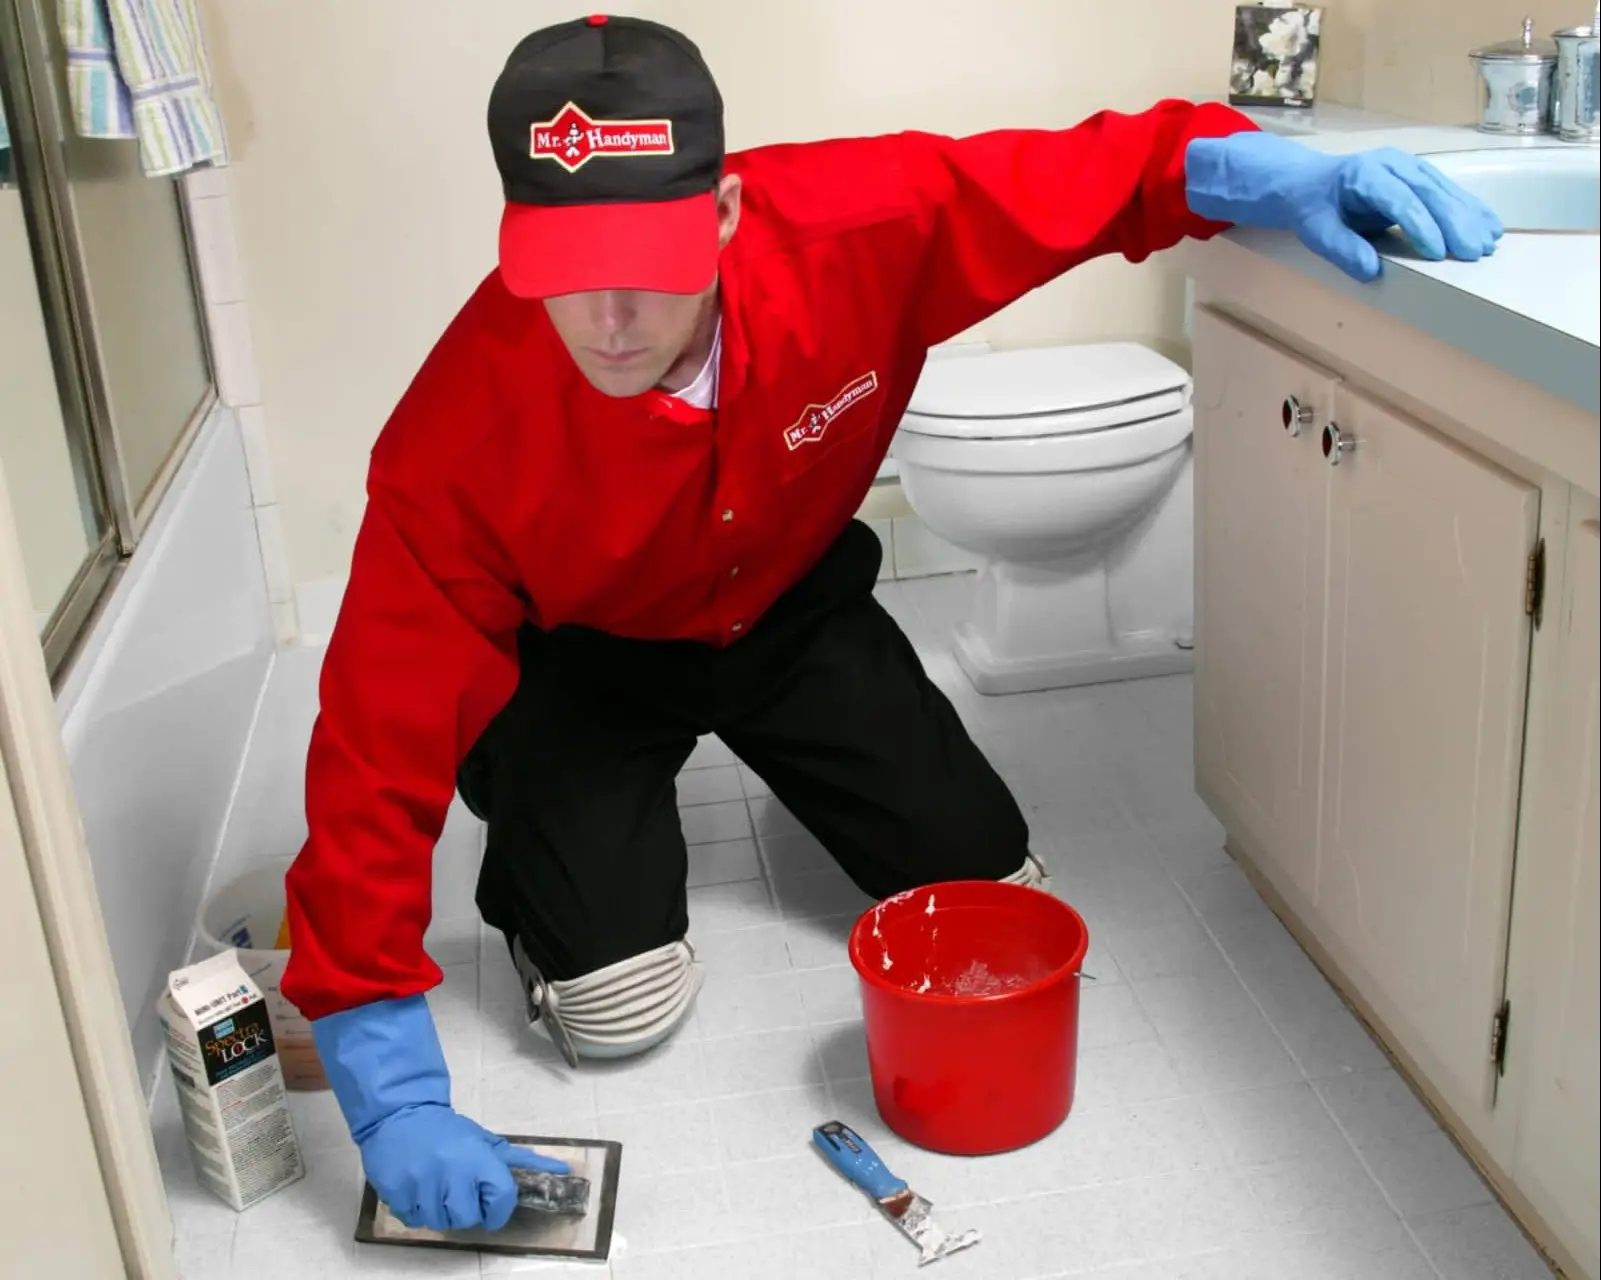 A handyman from Mr. Handyman spreading sealer over a tiled bathroom floor that has received grout repairs.